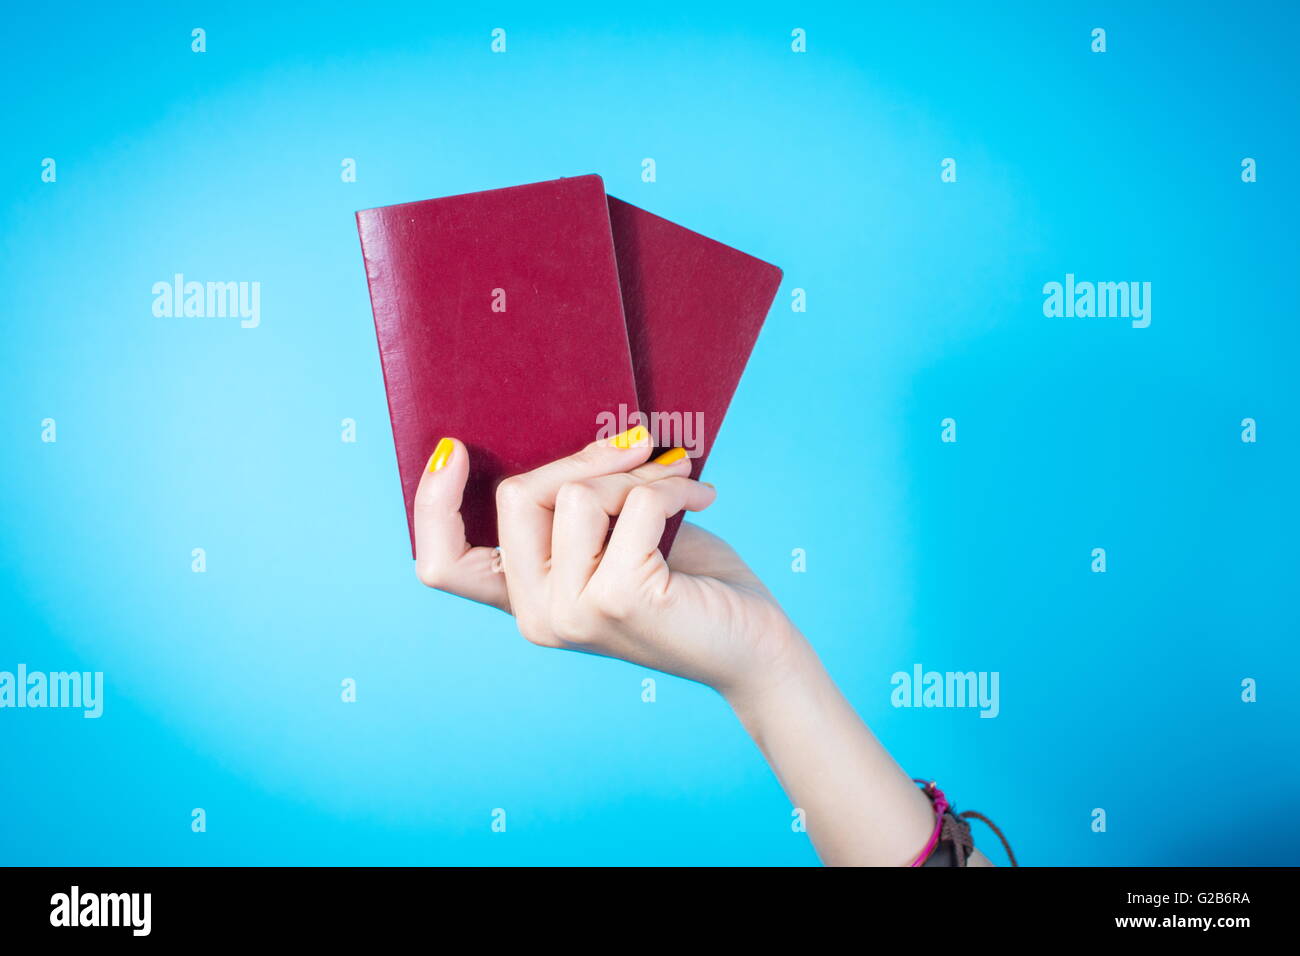 Womans hand holding a two red passports against blue background Stock Photo